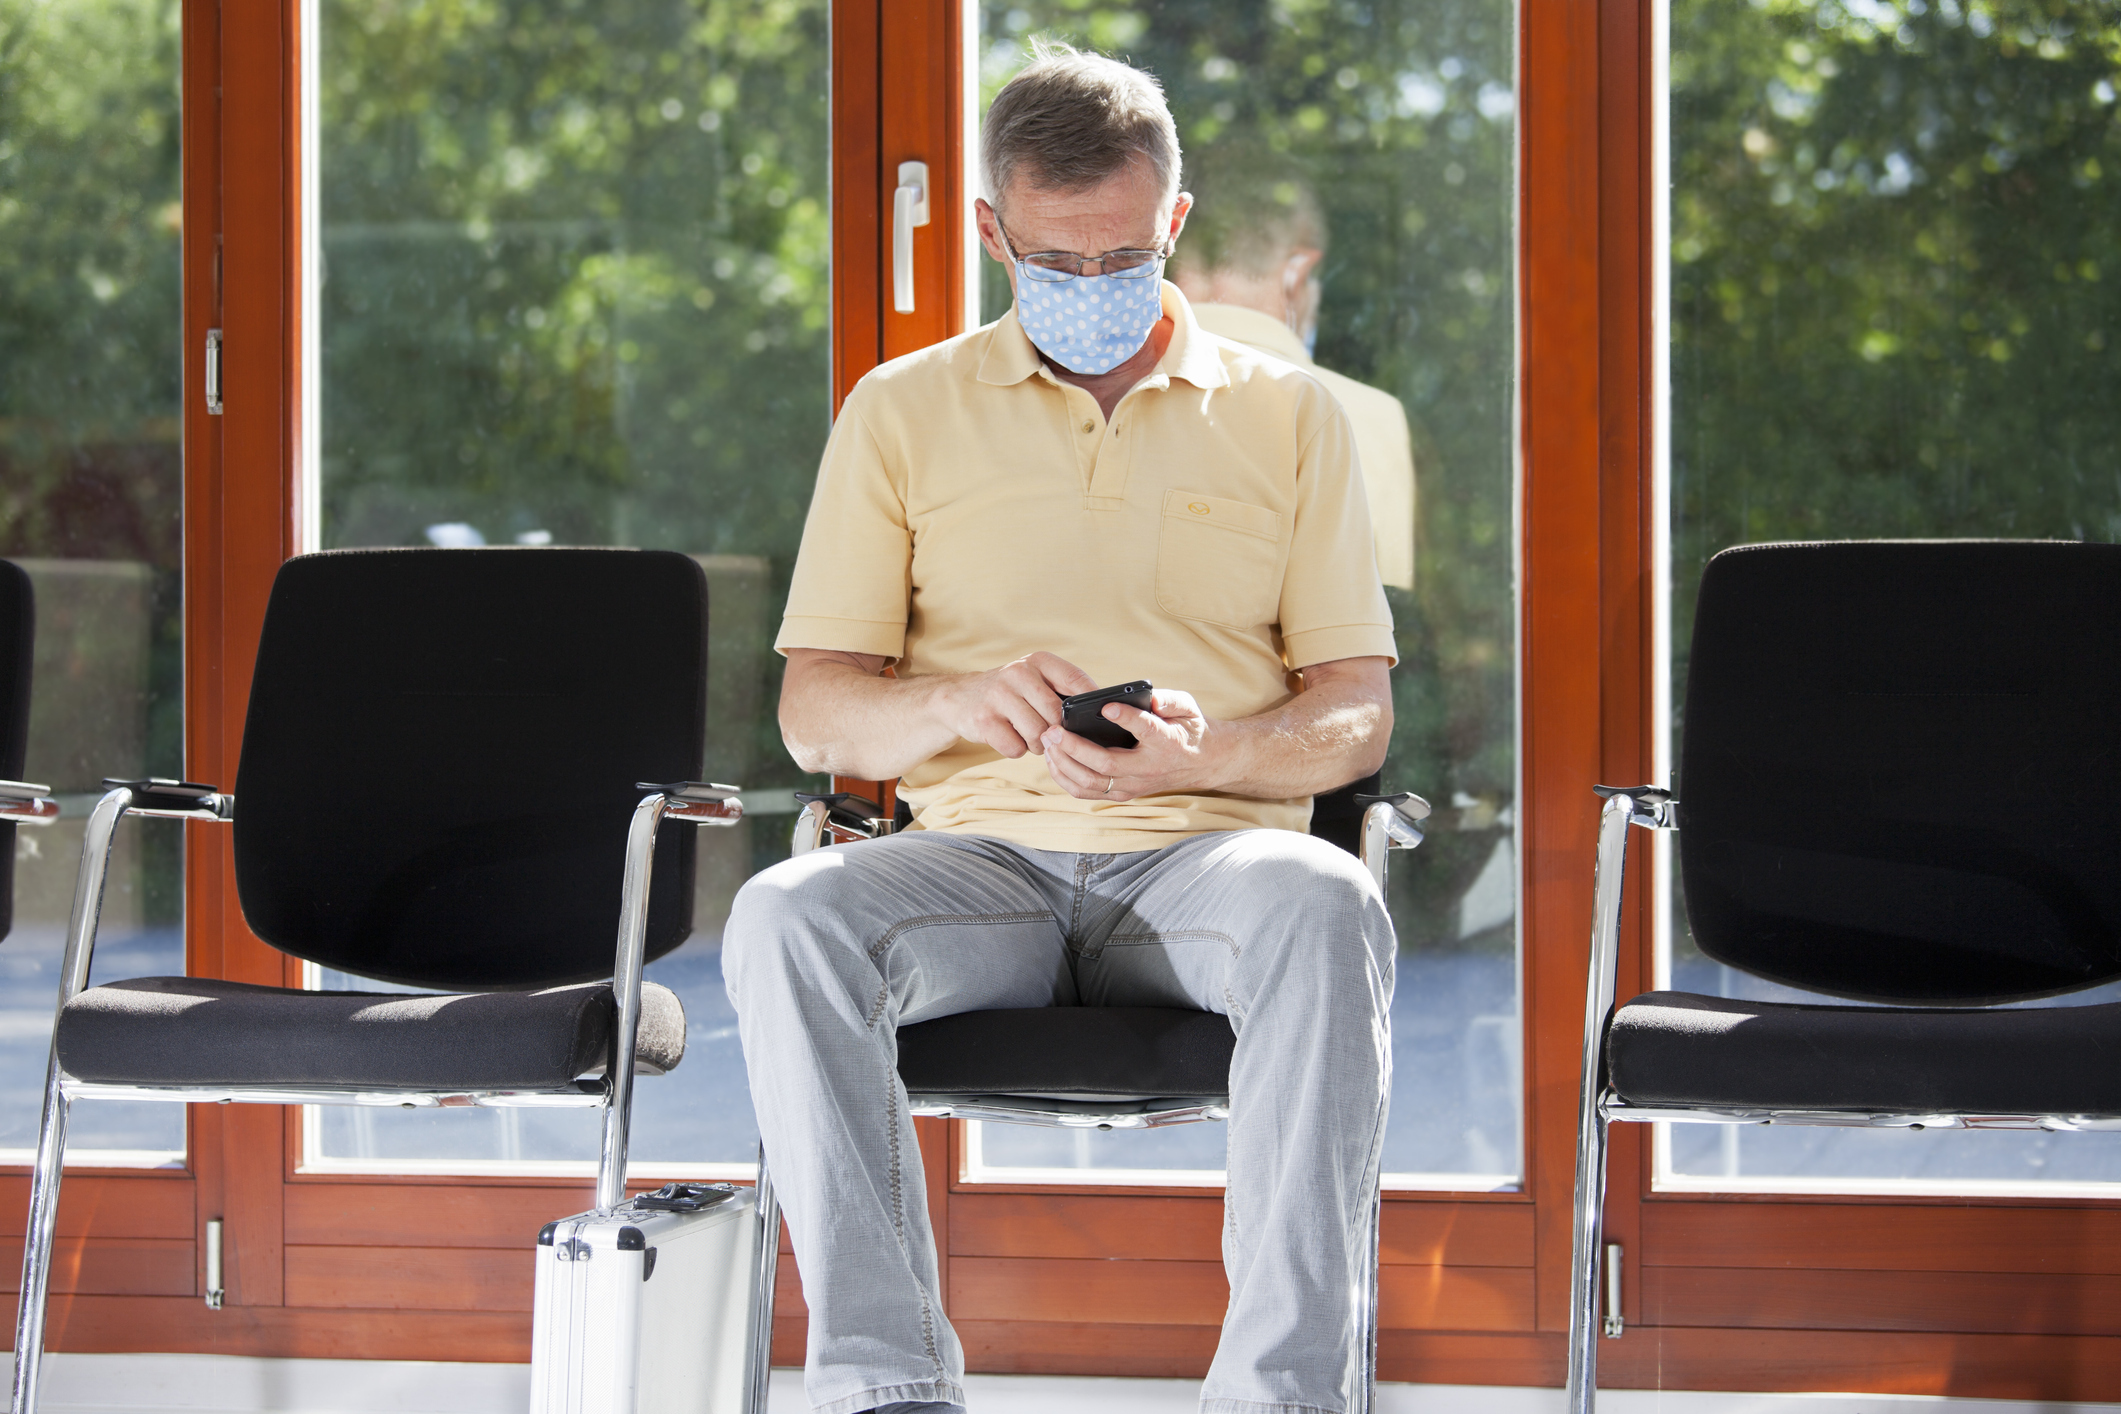 Man sitting, wearing a mask, looking at his phone